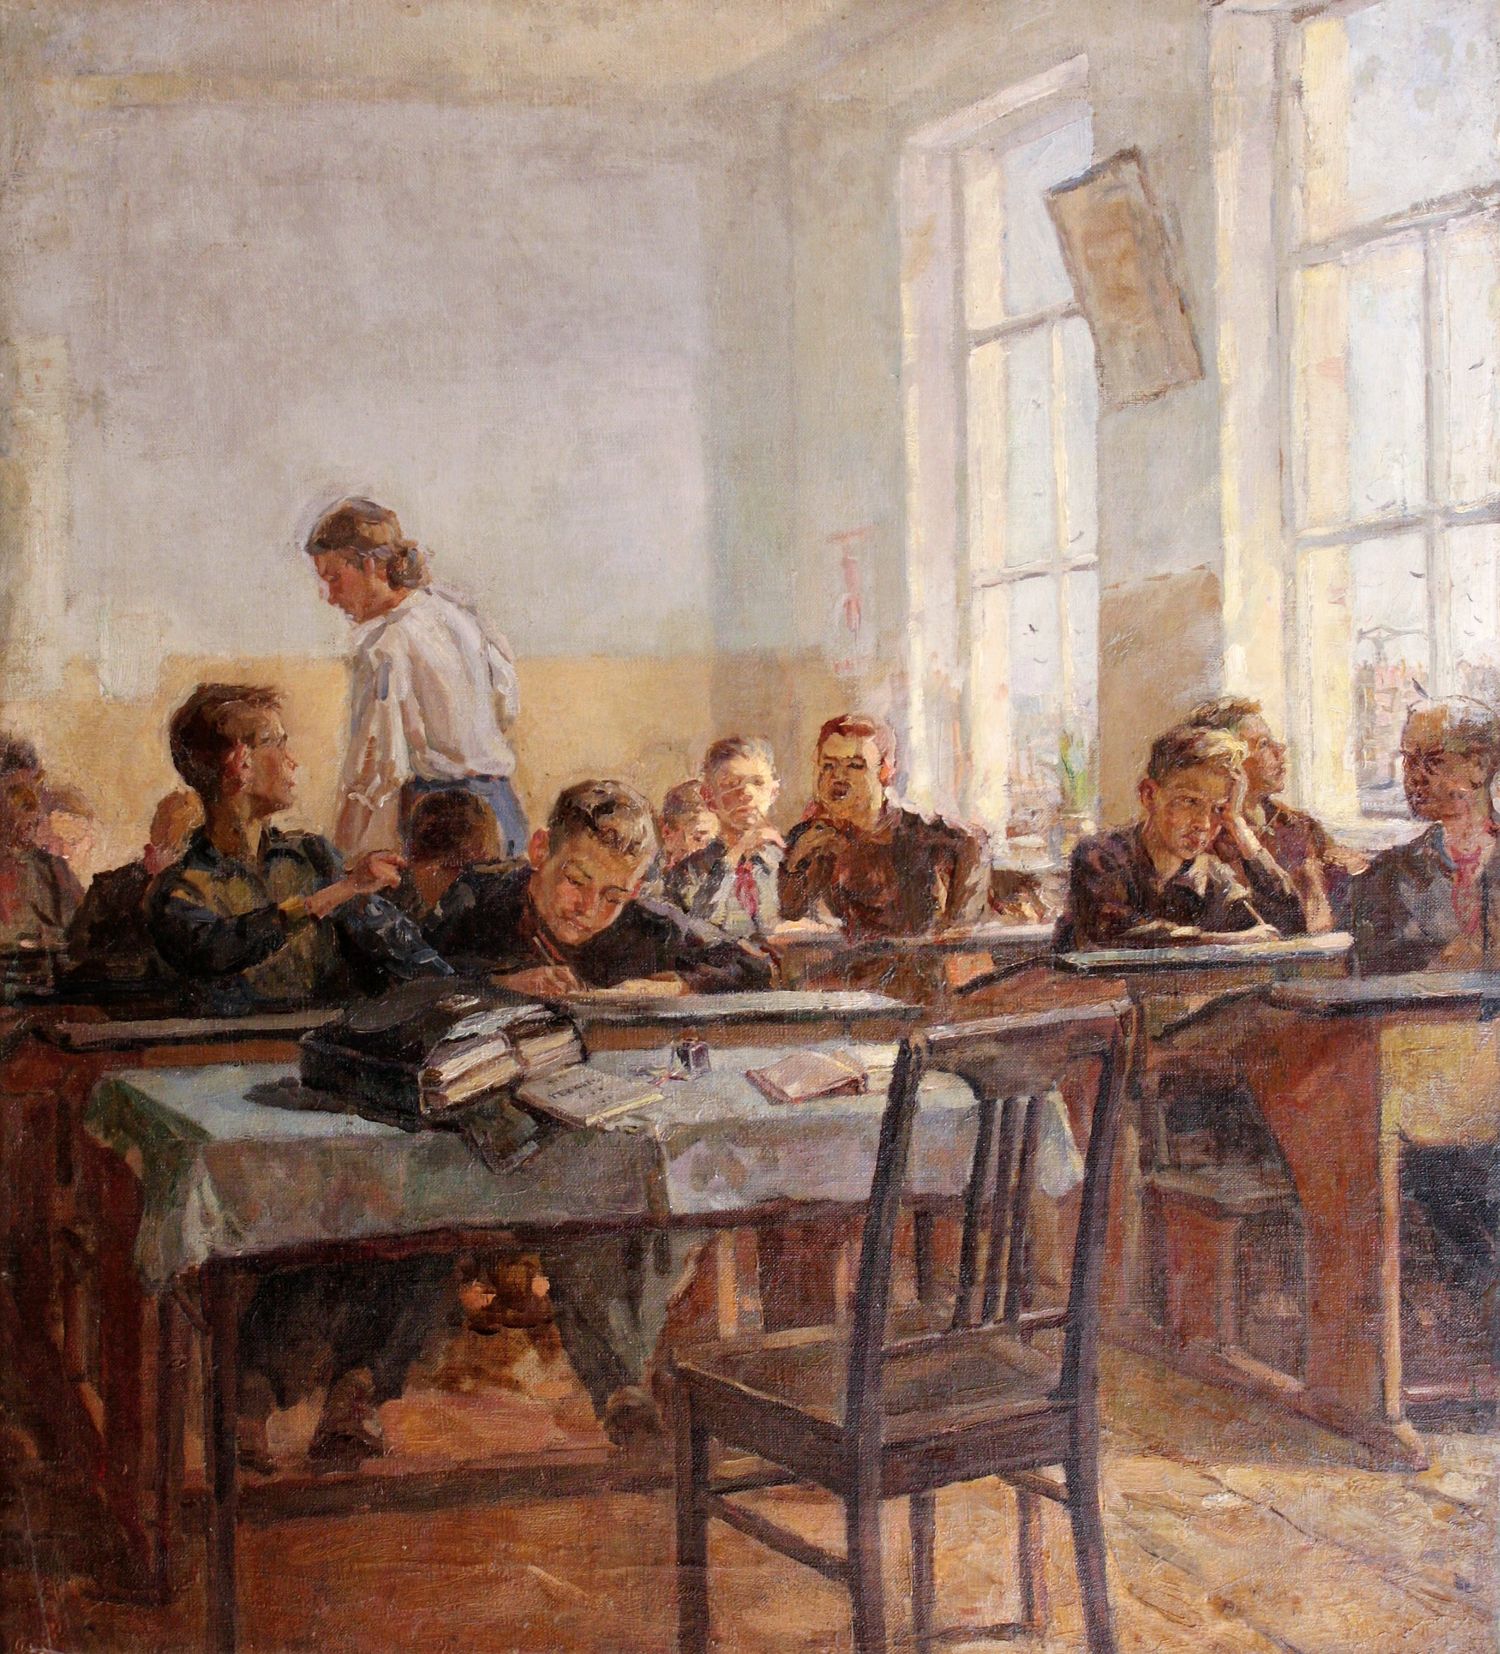 "At the lesson"